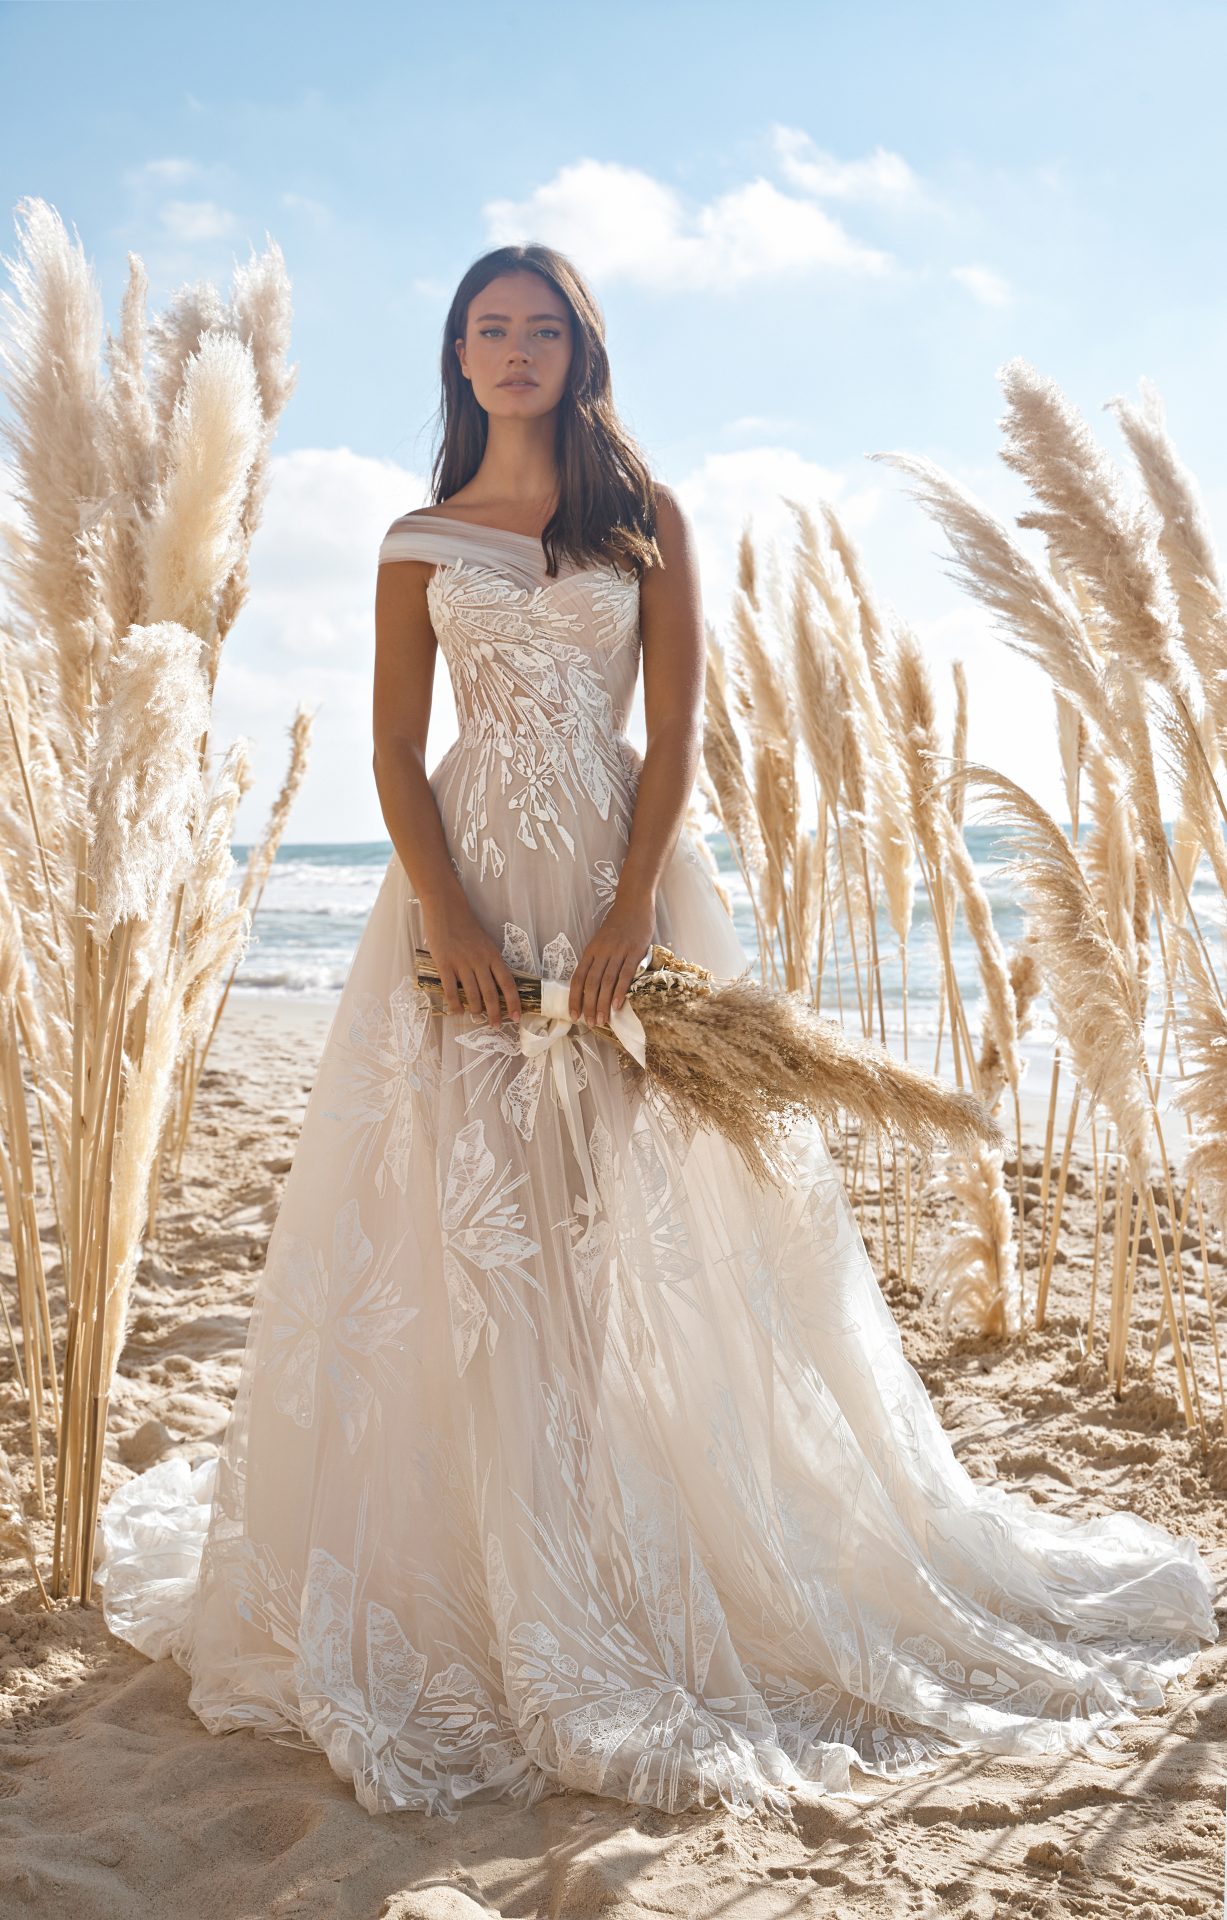 bride on a beach wearing lee petra grebenau raven wedding dress made of lace and tulle sold at dimitras bridal in chicago